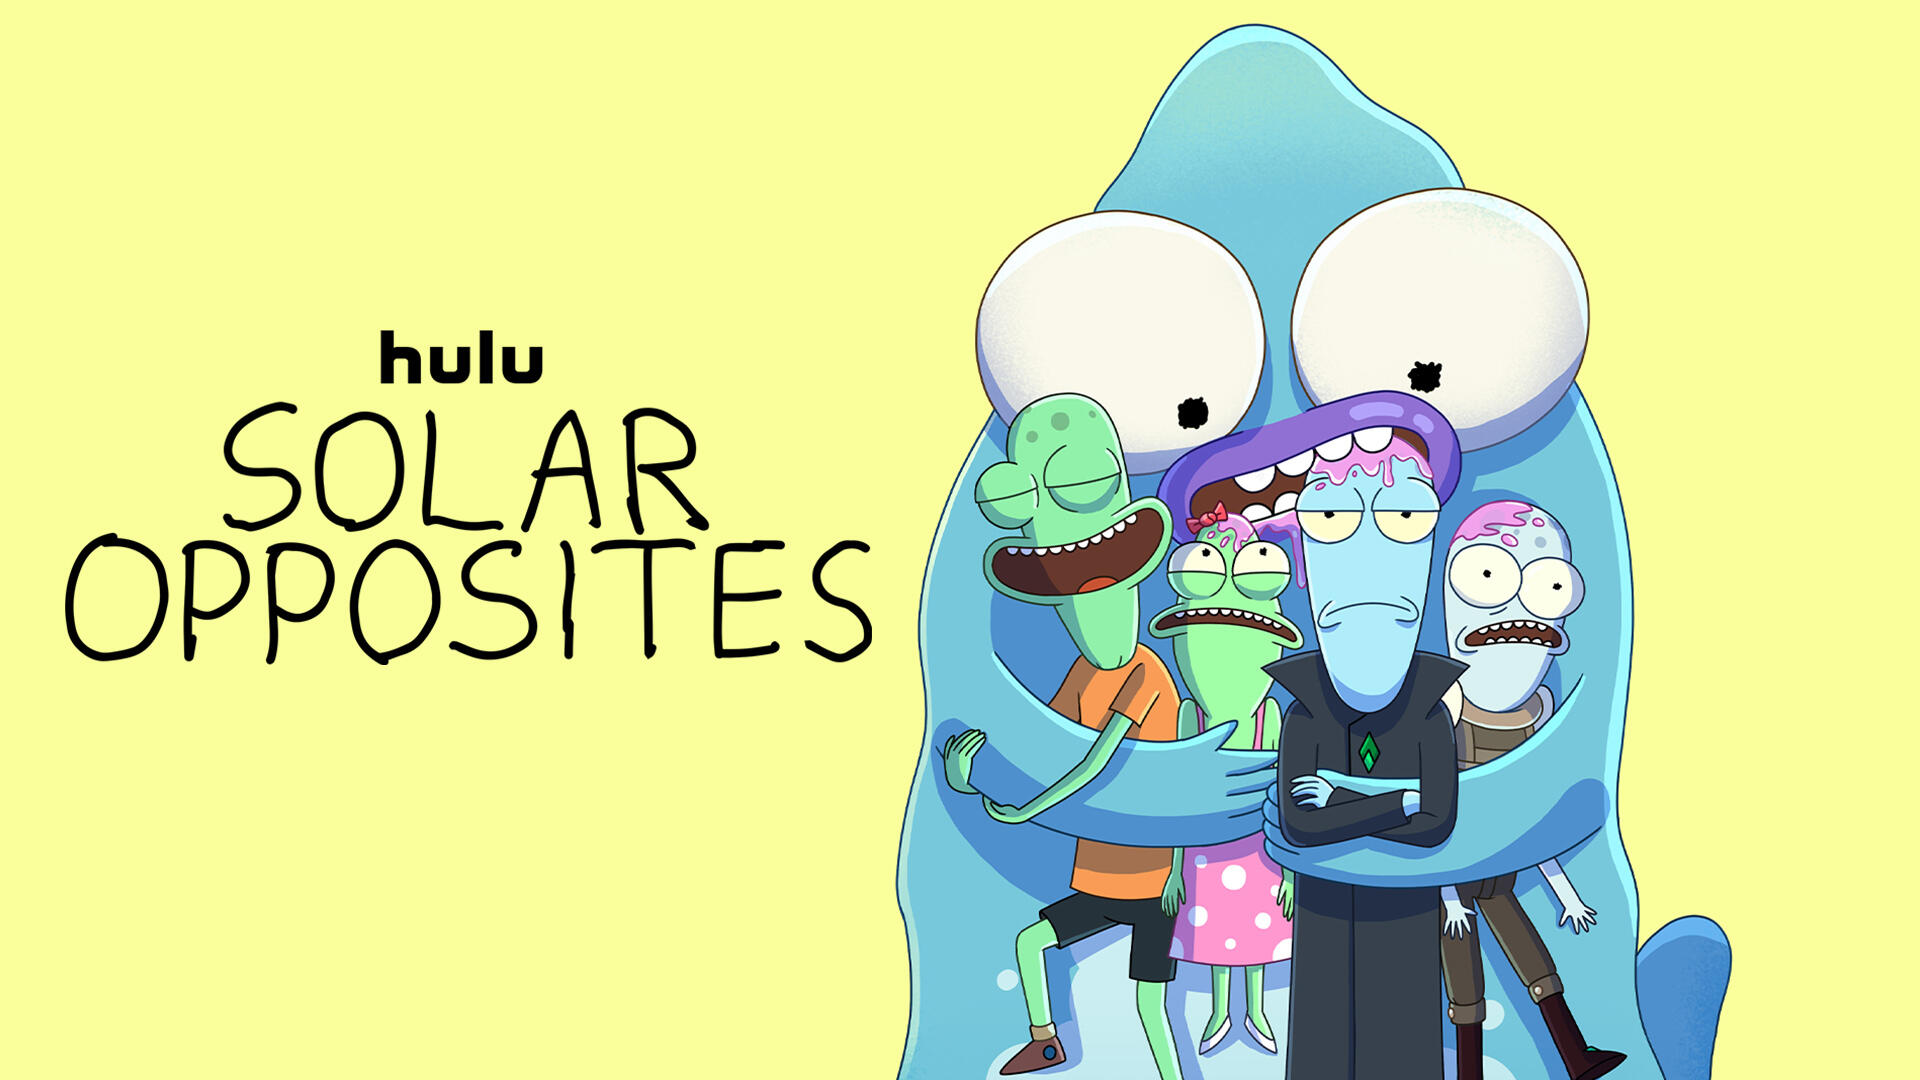 Solar Opposites -- Co-created by Justin Roiland (“Rick & Morty”) and Mike McMahan (“Rick & Morty”, “Star Trek: Lower Decks”), “Solar Opposites” centers around a team of four aliens who are evenly split on whether Earth is awful or awesome. Korvo (Justin Roiland) and Yumyulack (Sean Giambrone) only see the pollution, crass consumerism, and human frailty while Terry (Thomas Middleditch) and Jesse (Mary Mack) love TV, junk food and fun stuff. In season three, this alien team strives to be less of a team and more of a family team. (Courtesy of Hulu)